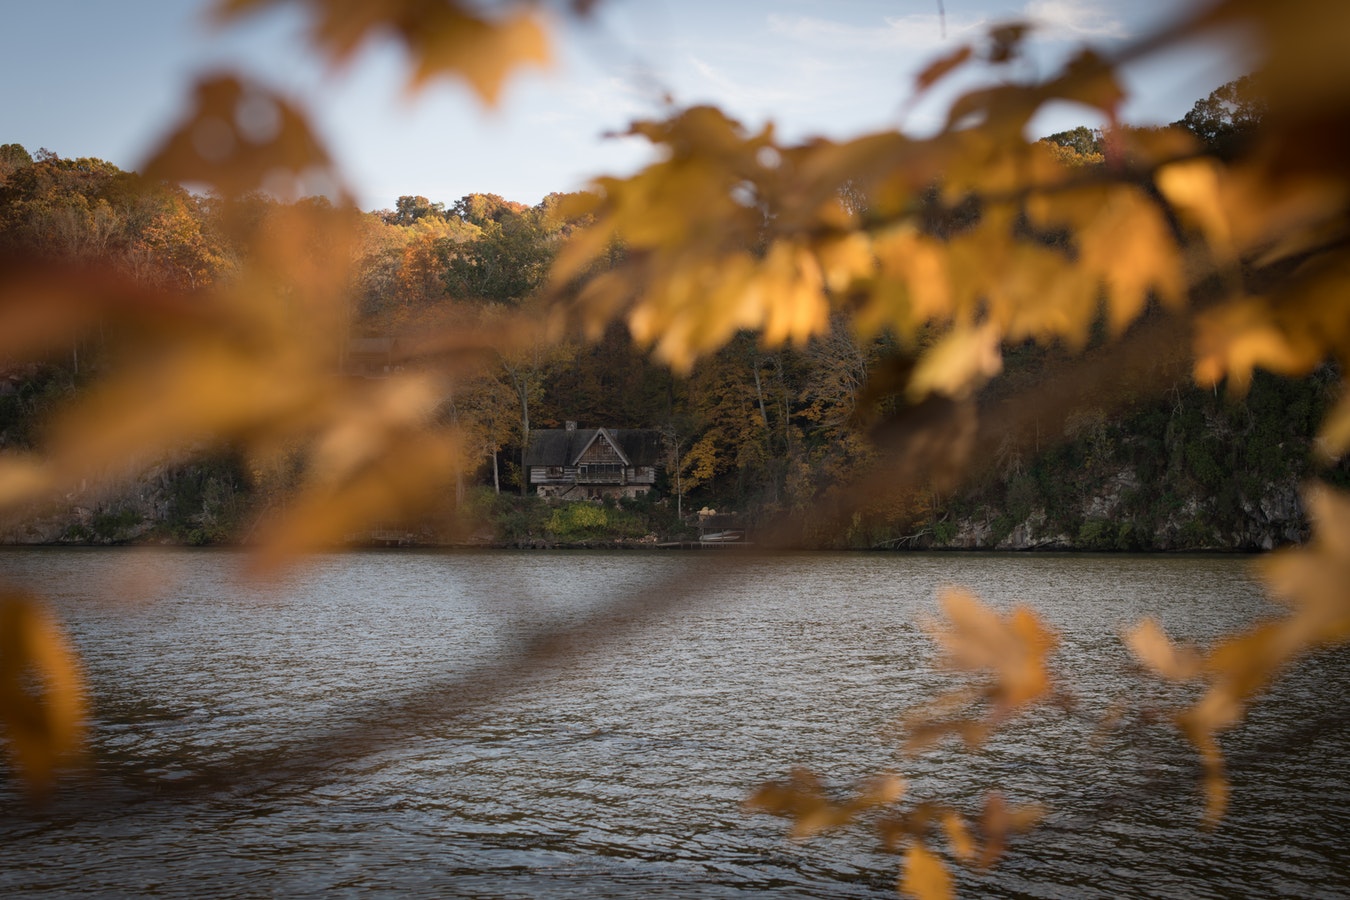 Cottage on a lakeshore in fall.